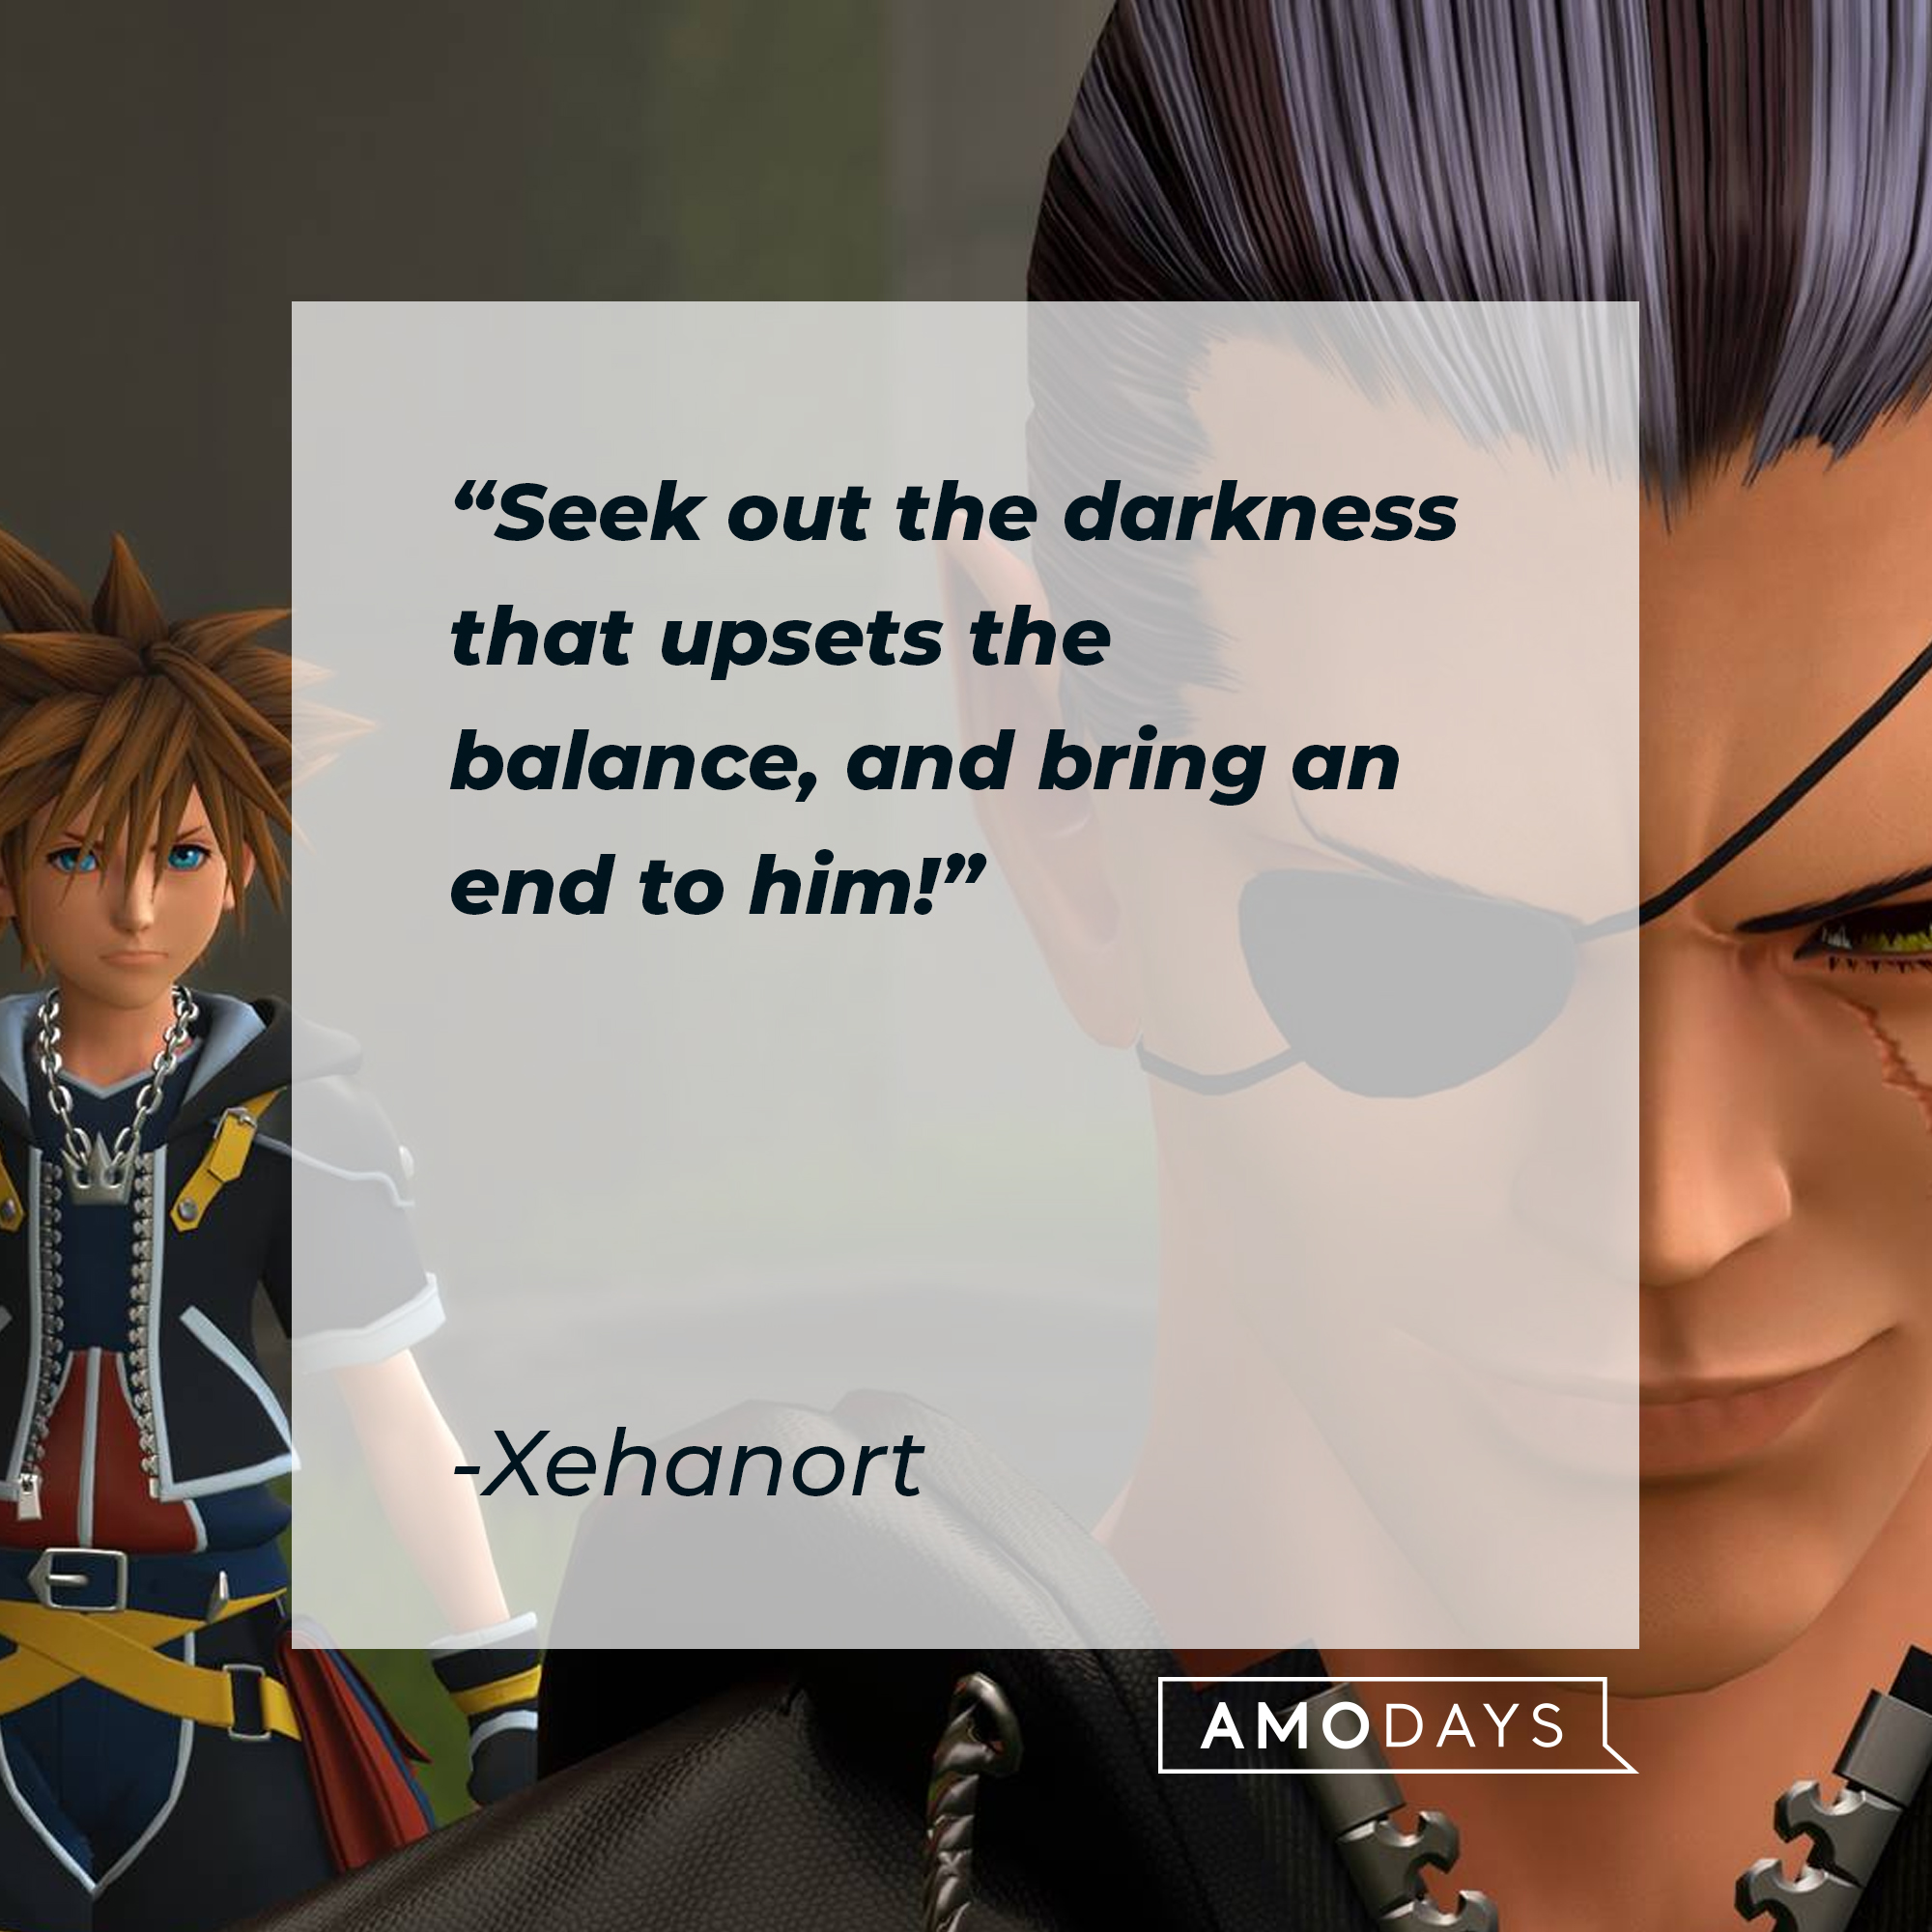 An image of Xigbar and Sora with Xehanort’s quote: "Seek out the darkness that upsets the balance, and bring an end to him!" | Source: facebook.com/KingdomHearts